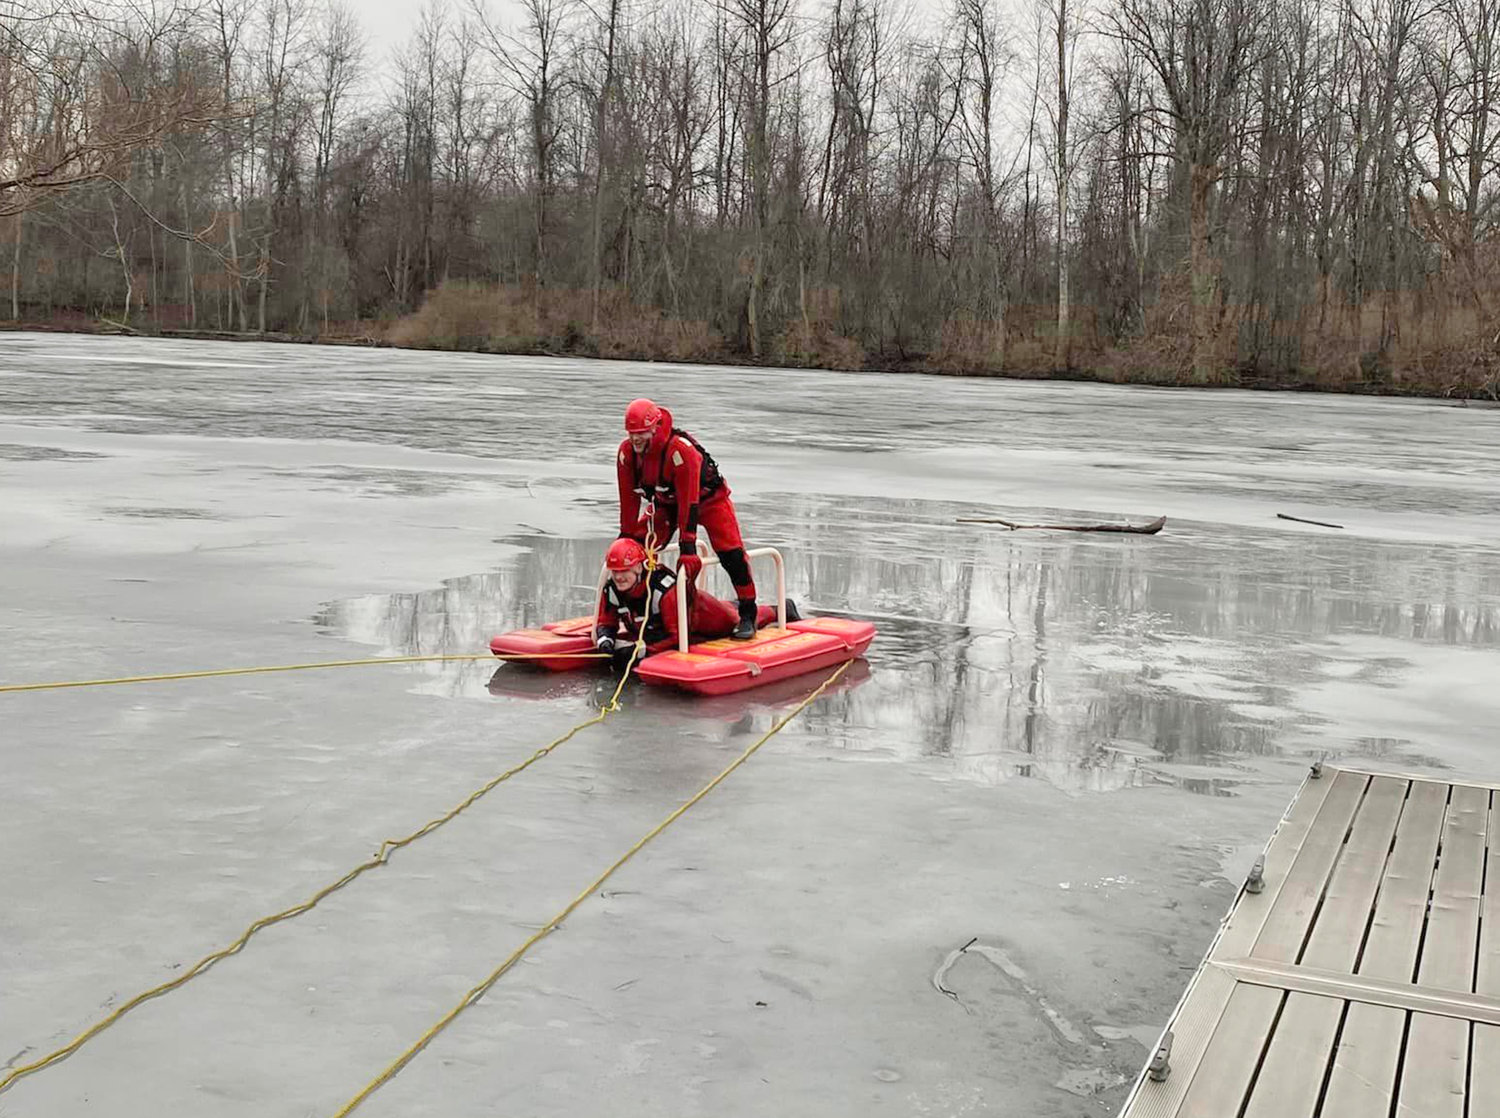 As part of ice water rescue training, Rome firefighters took their rescue sled out onto the frozen Barge Canal Tuesday afternoon. The training is an annual requirement from the state. As part of the exercise, the firefighters, clad in protective suits, brave the frigid waters of the canal to keep their skills sharp if an ice/water emergency rescue is needed.